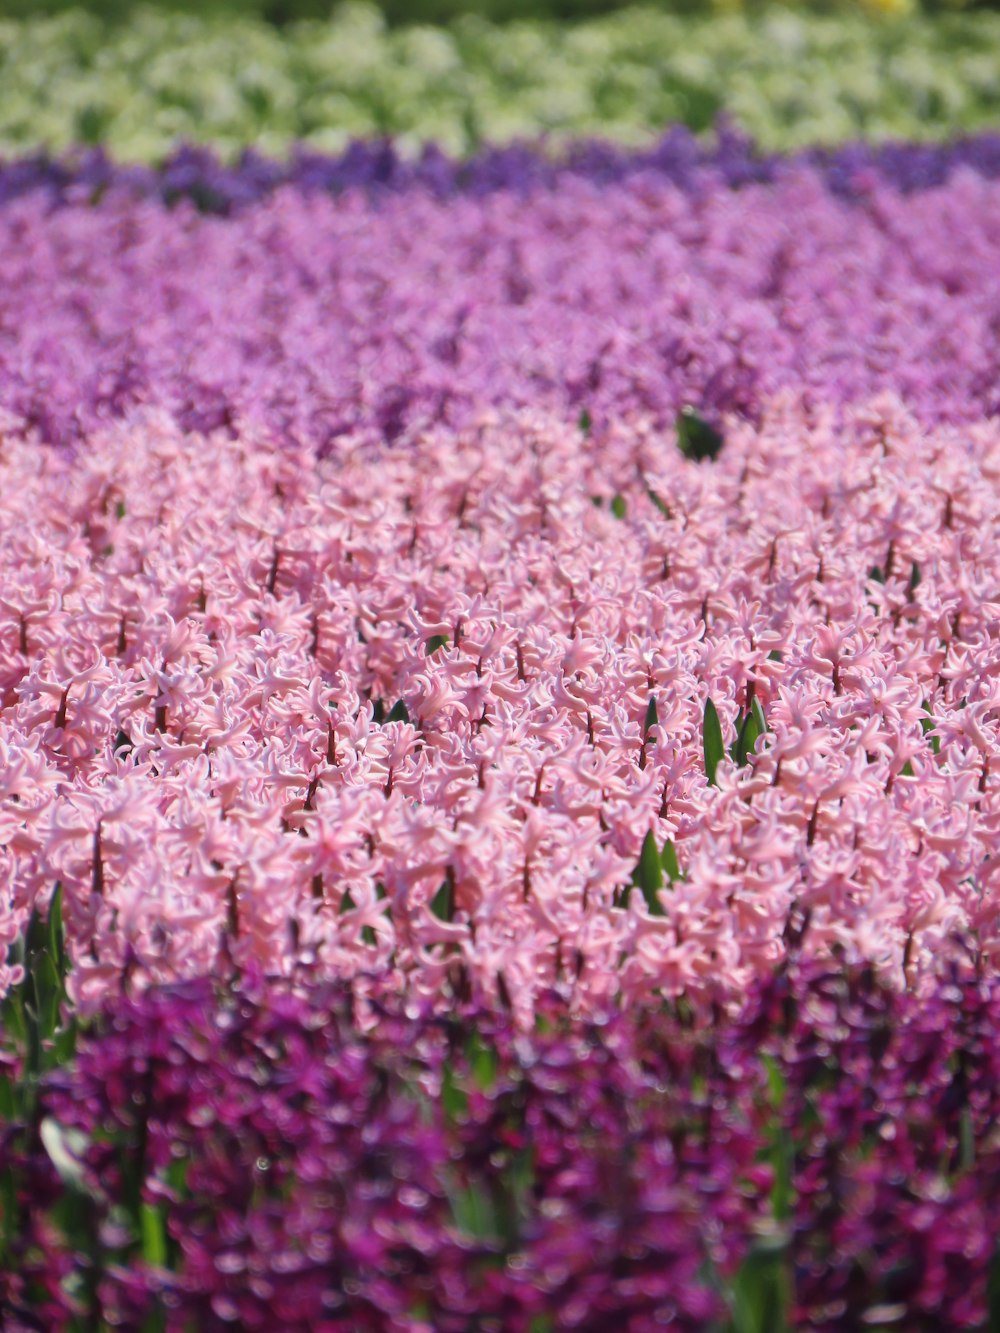 a field full of purple and white flowers